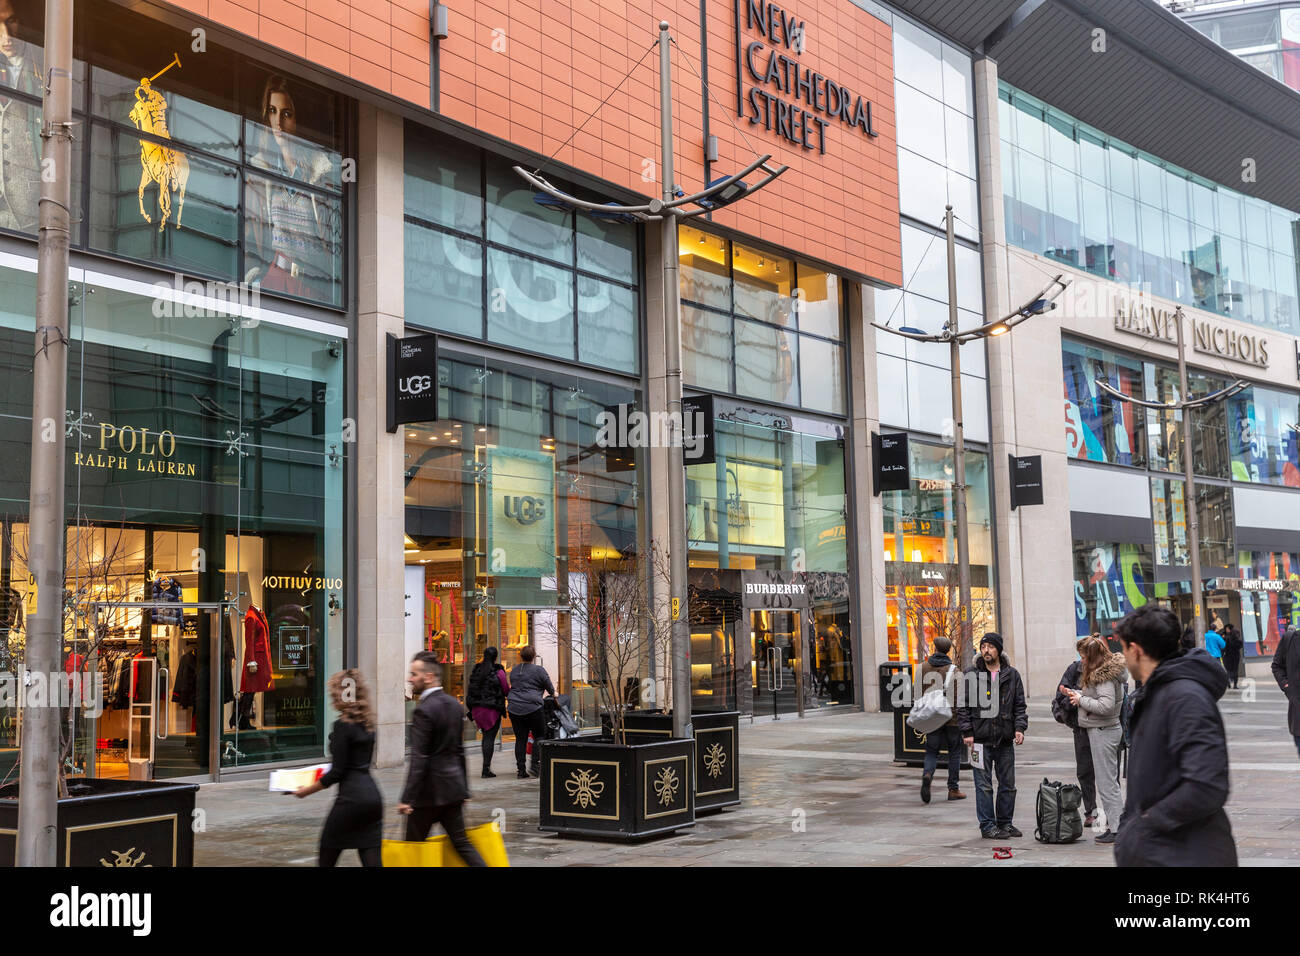 New Cathedral street in Manchester city centre with luxury goods retailers  including Burberry,Ralph Lauren Polo and Harvey Nichols,England Stock Photo  - Alamy